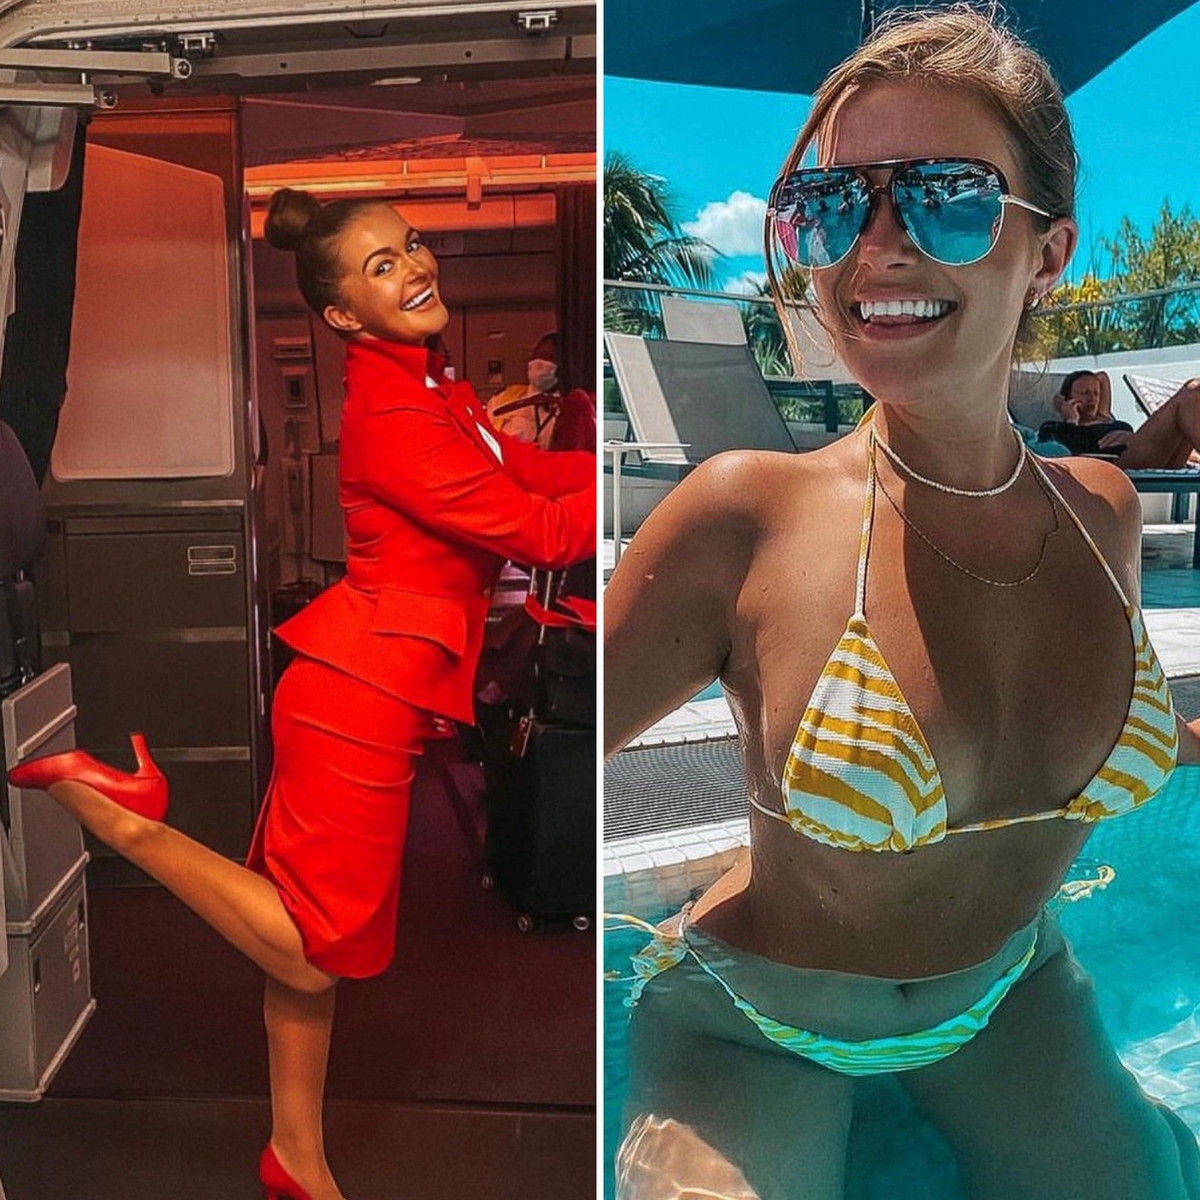 Flight Attendants With And Without Uniform (23 pics)